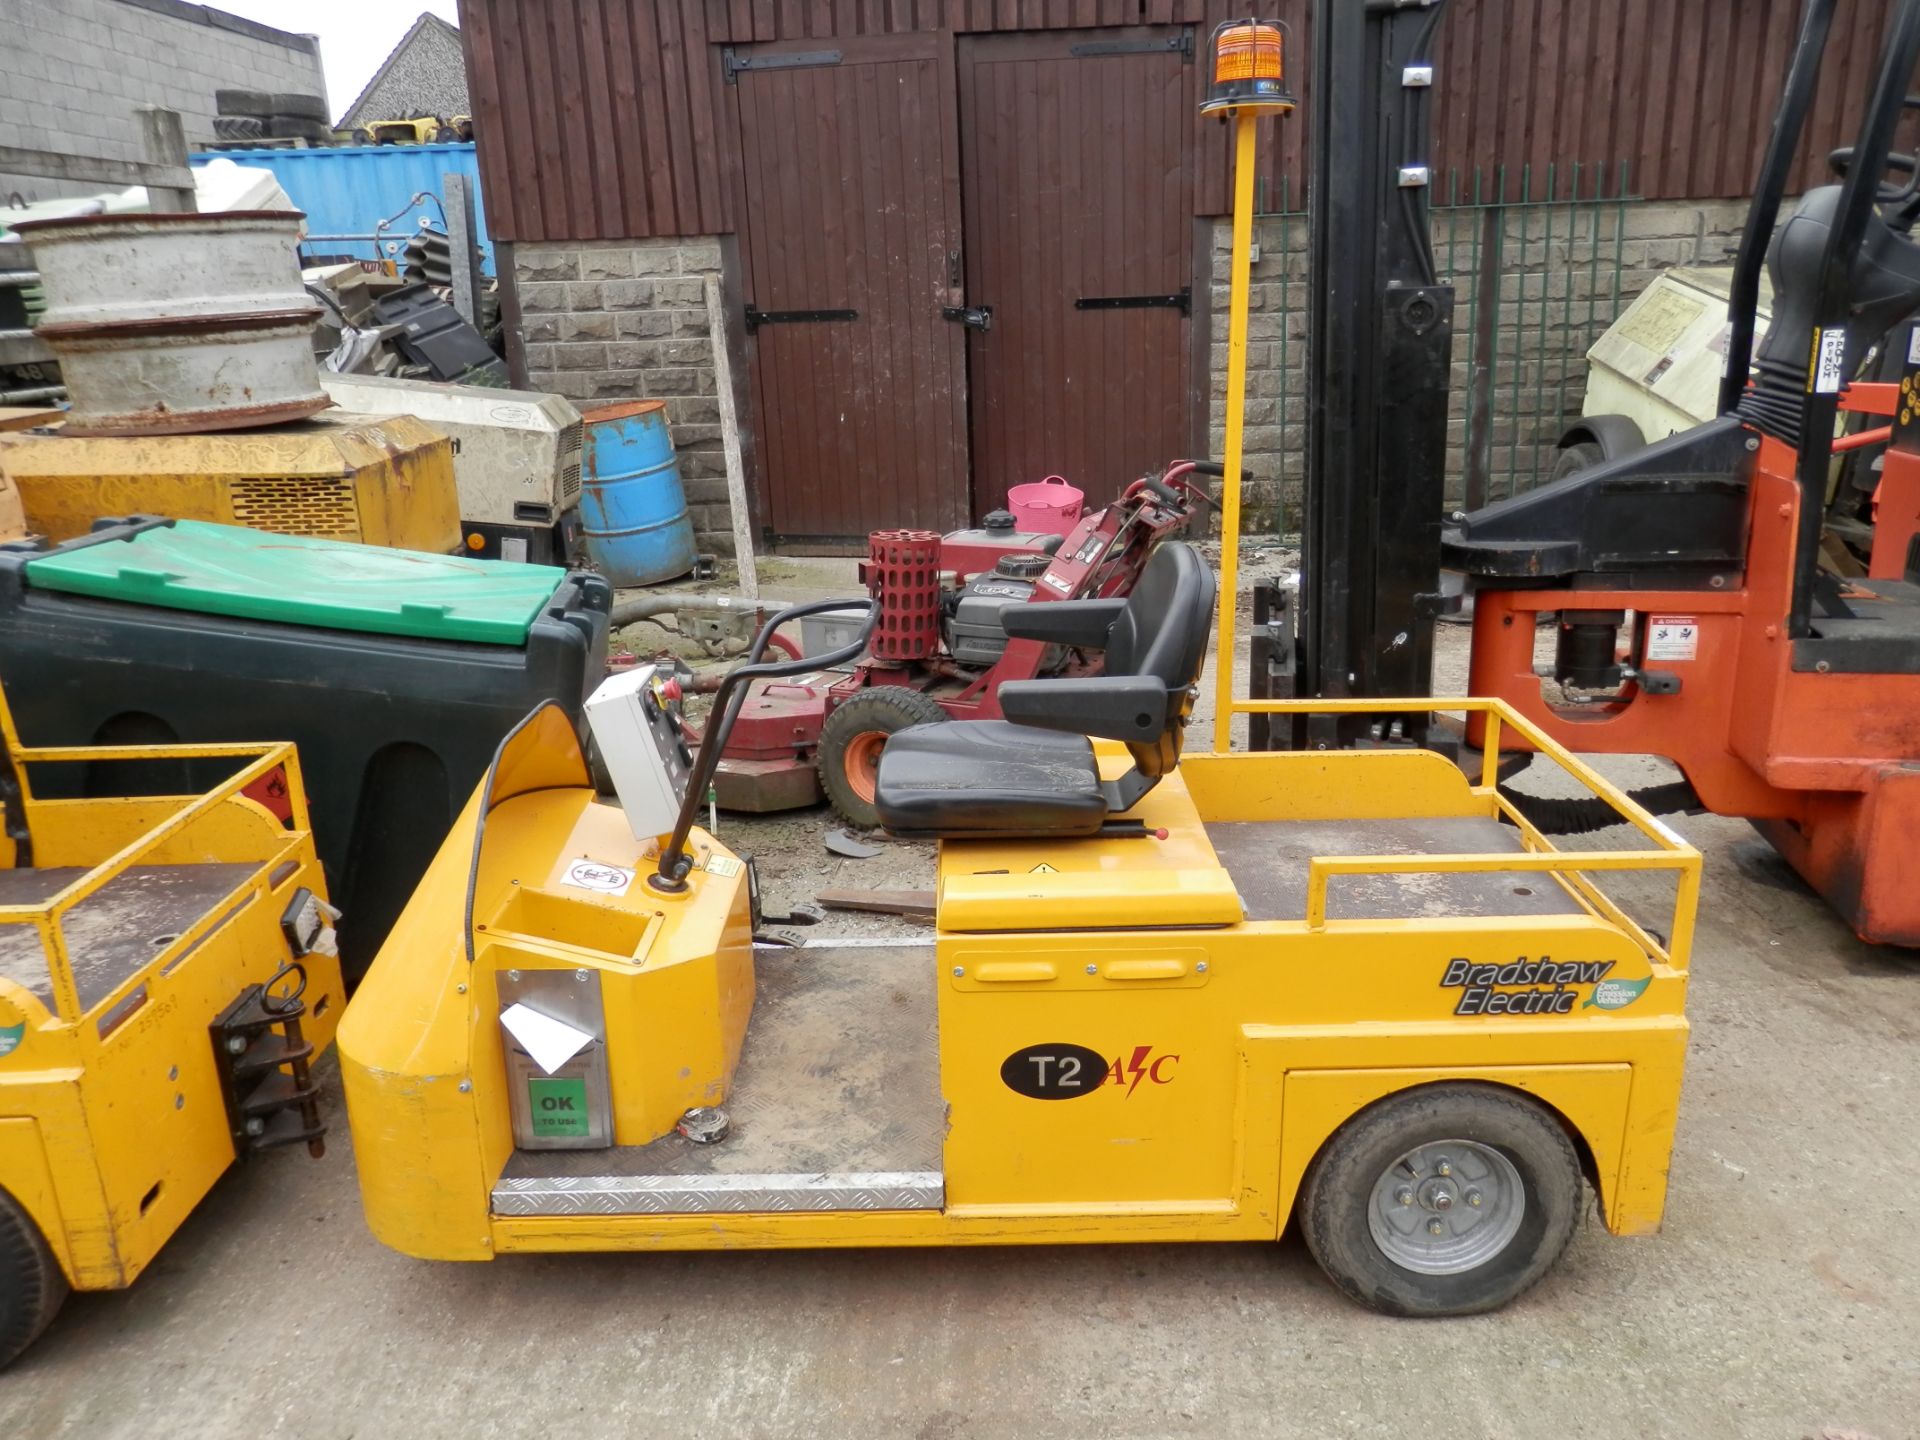 2011 BRADSHAW T2 ELECTRIC TUG/TOW TRACTOR, WORKING READY FOR USE. 1.5 TONNE TOW CAPACITY. - Image 2 of 9